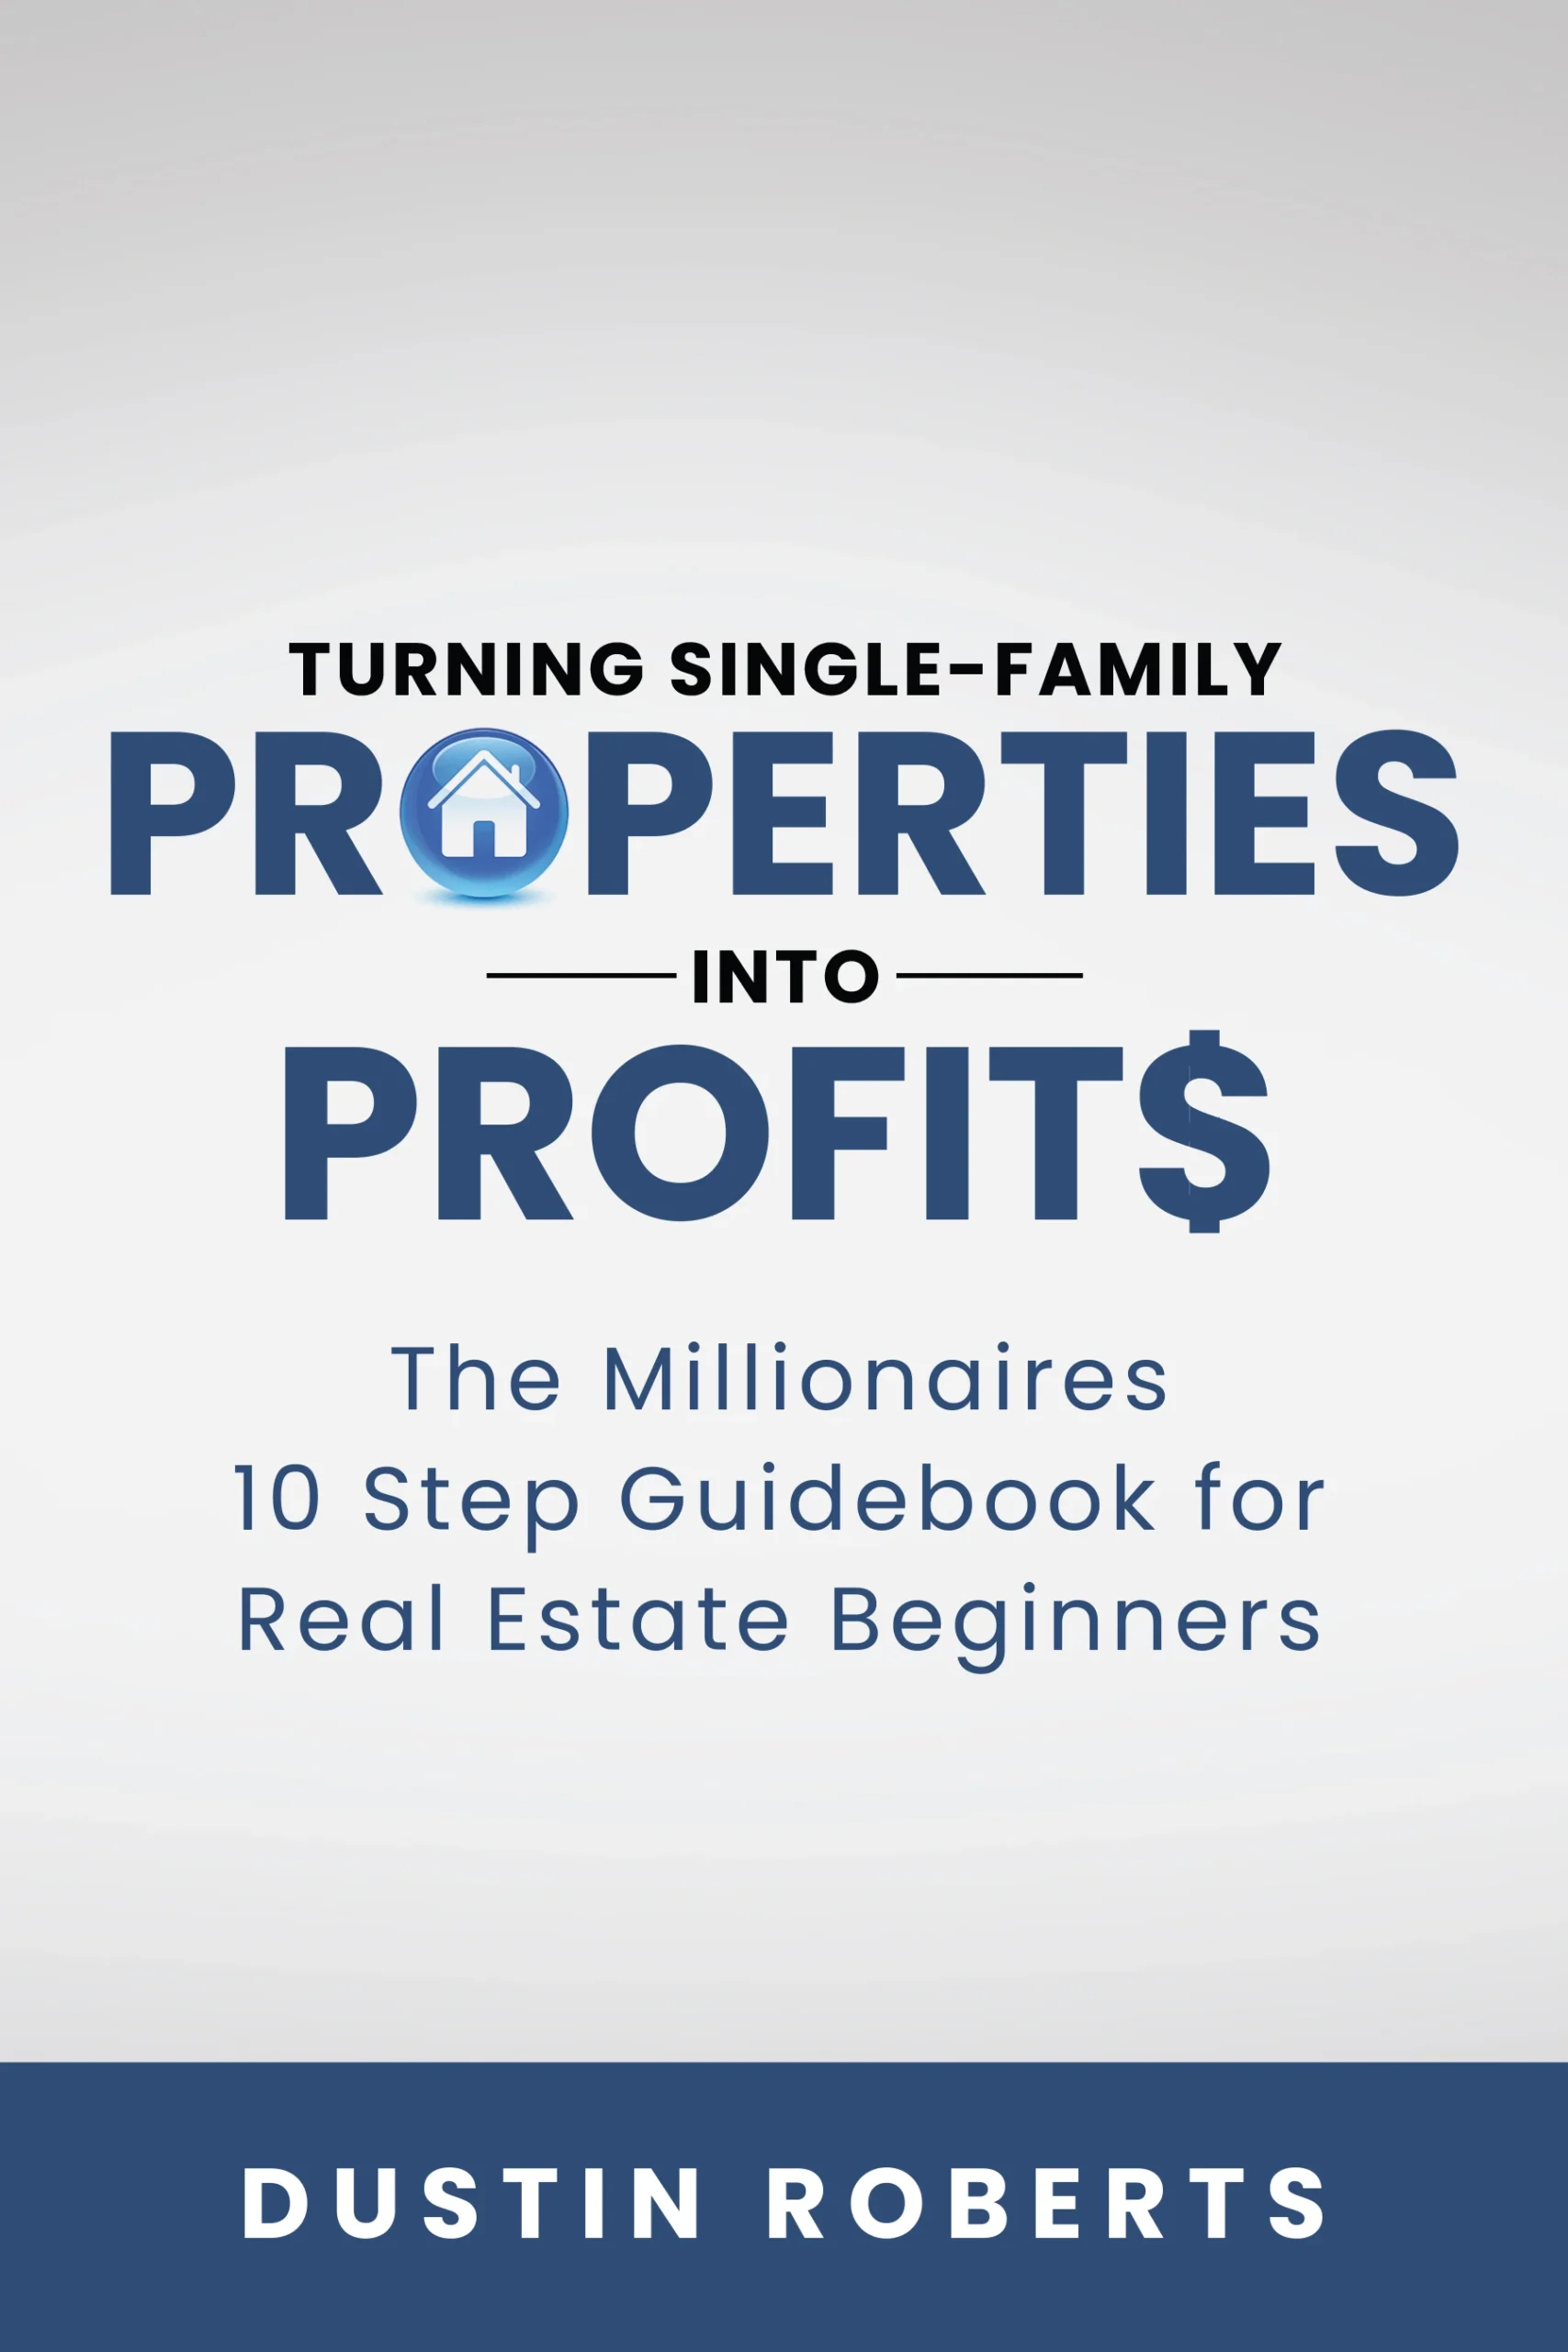 Turning Single-Family Properties into Profit$: The Millionaires 10 Step Guidebook for Real Estate Beginners